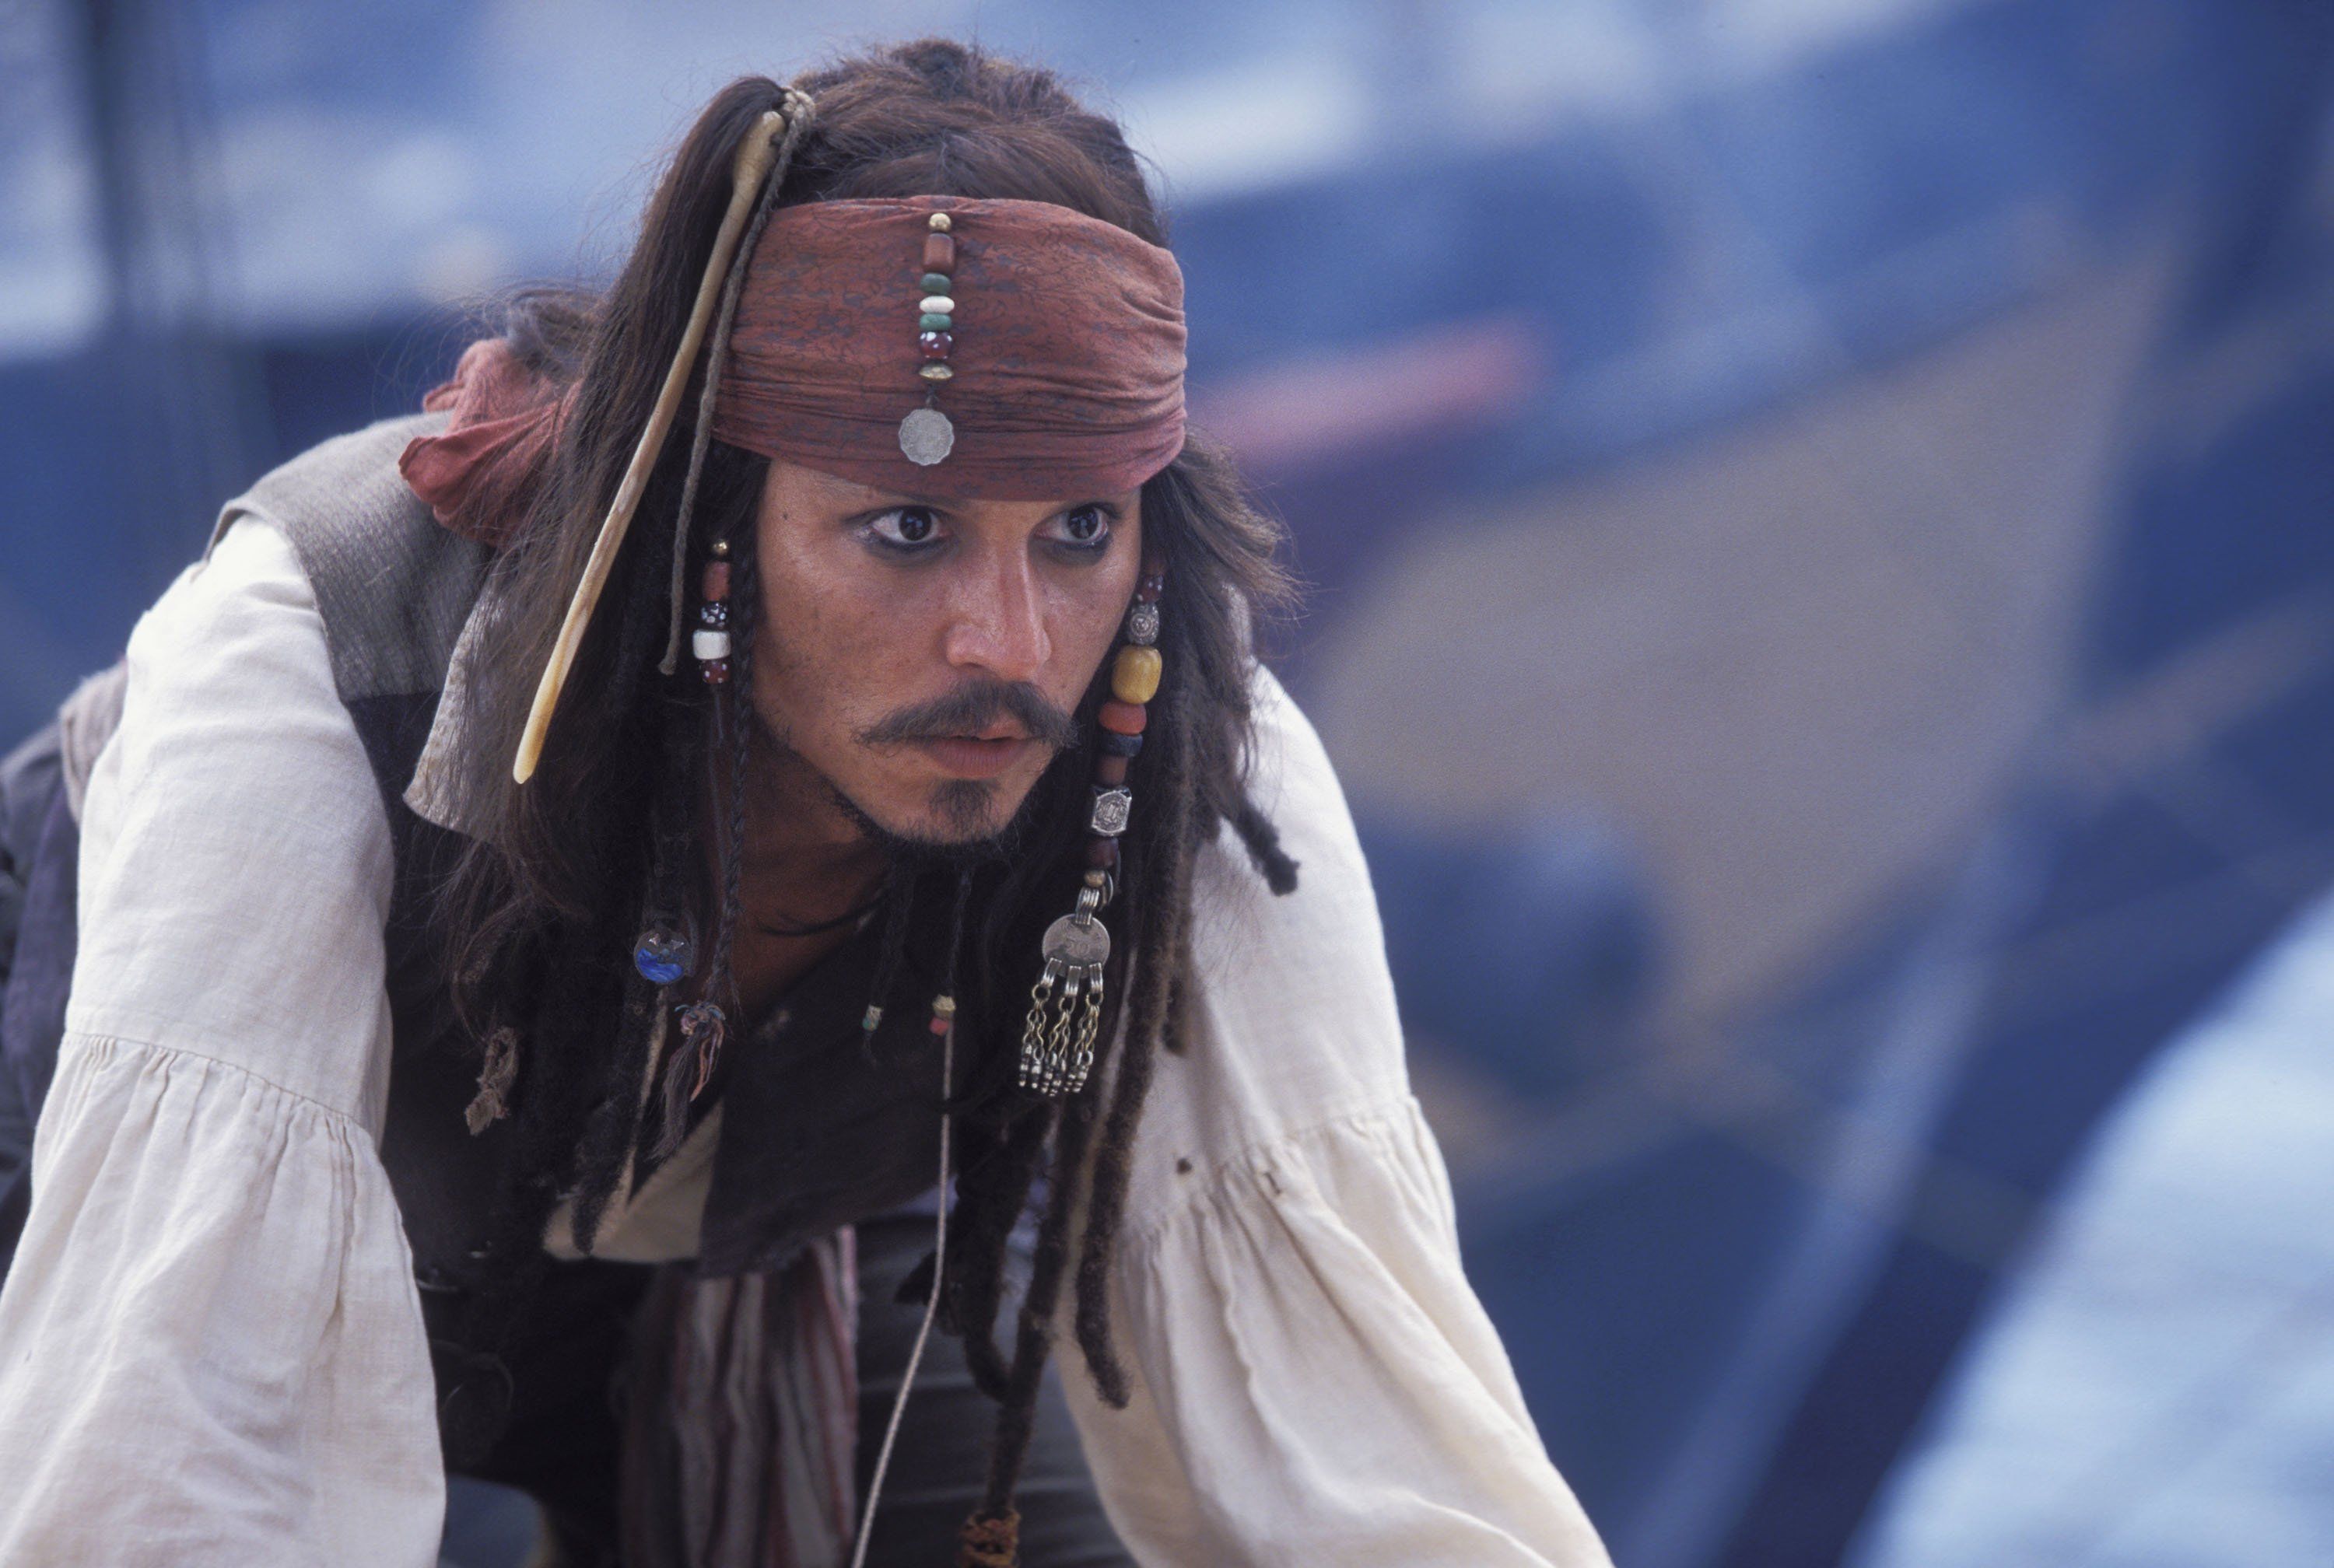 johnny depp, jack sparrow, pirates of the caribbean: the curse of the black pearl, movie, pirates of the caribbean